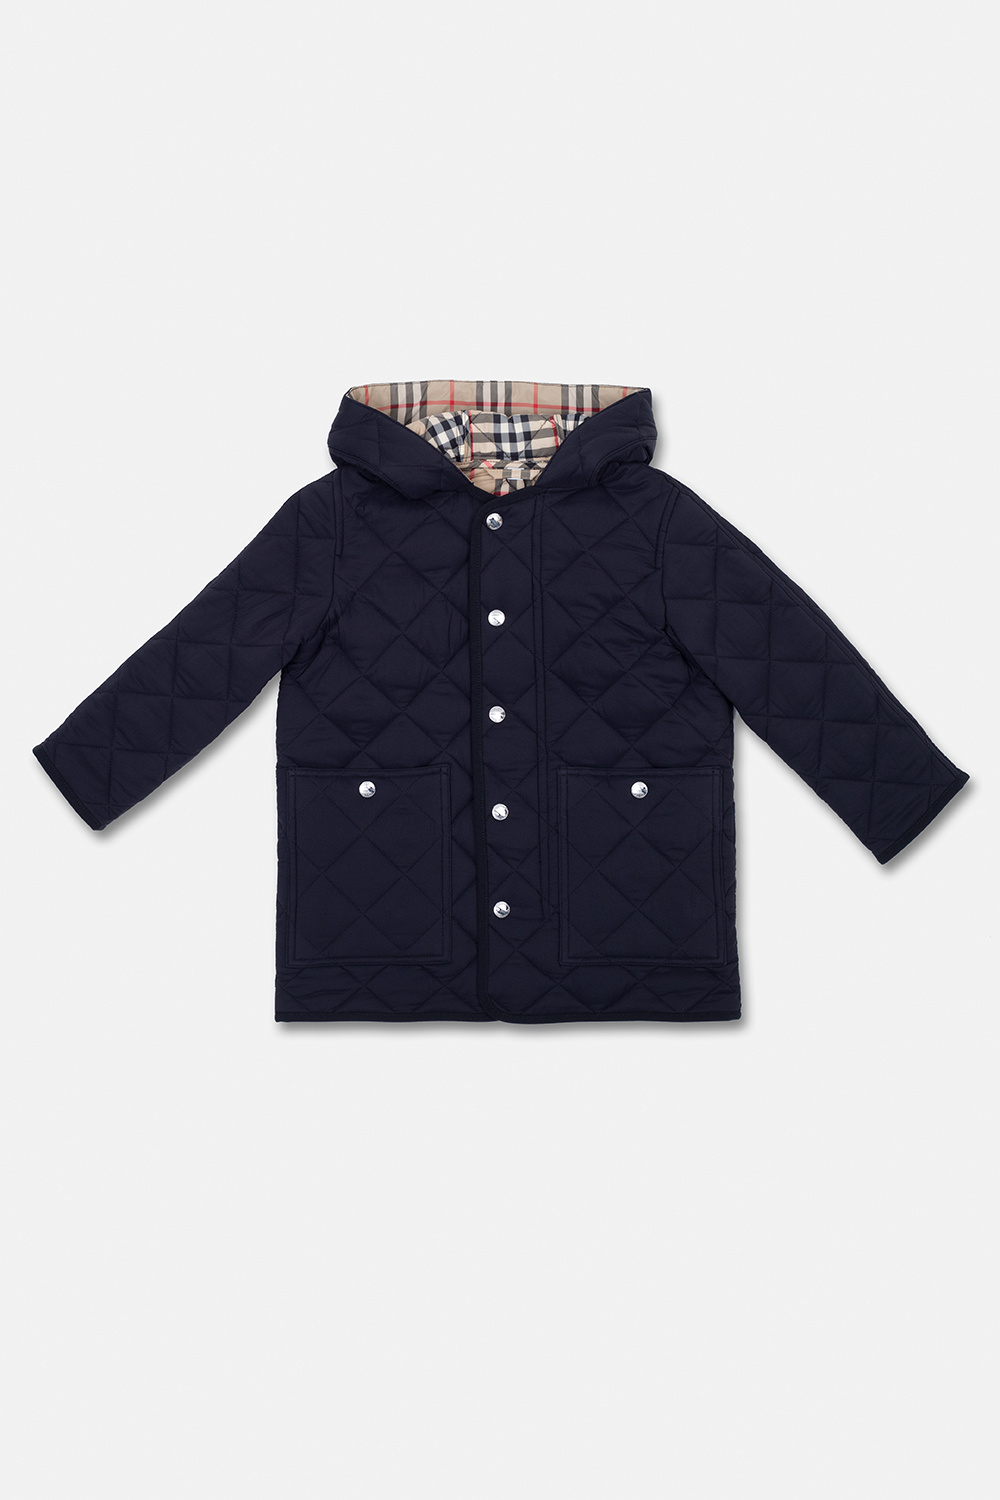 Burberry Kids ‘Reilly’ quilted jacket